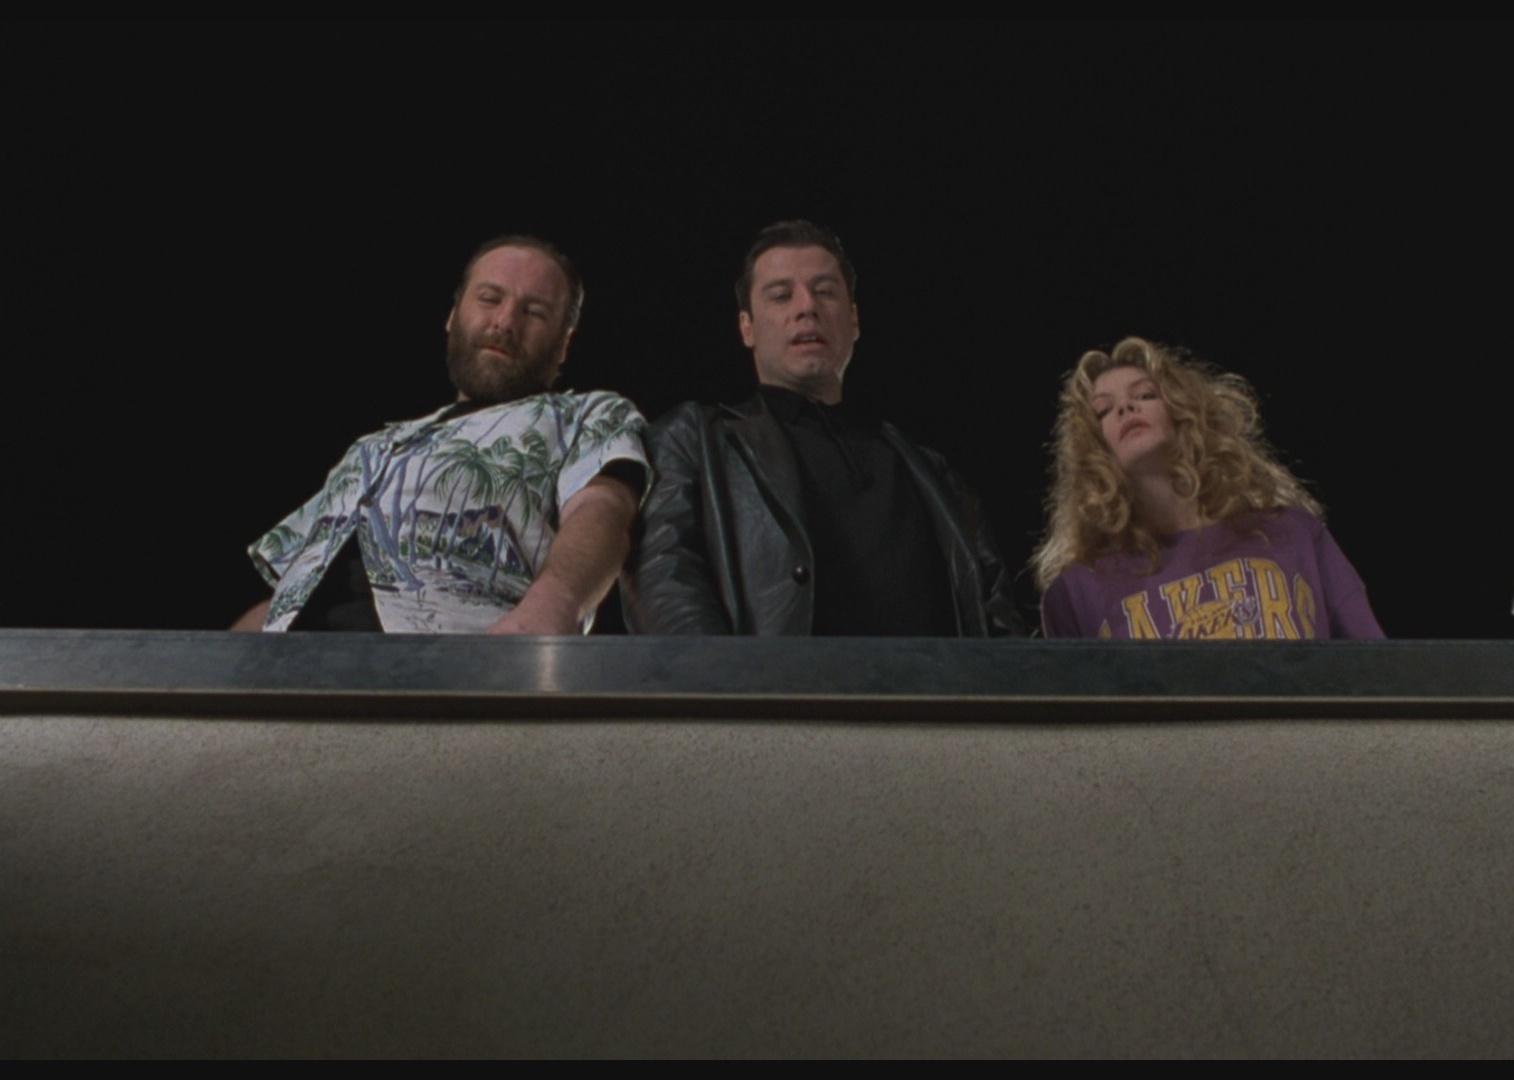 John Travolta, Rene Russo, and James Gandolfini looking down from the top of a building.